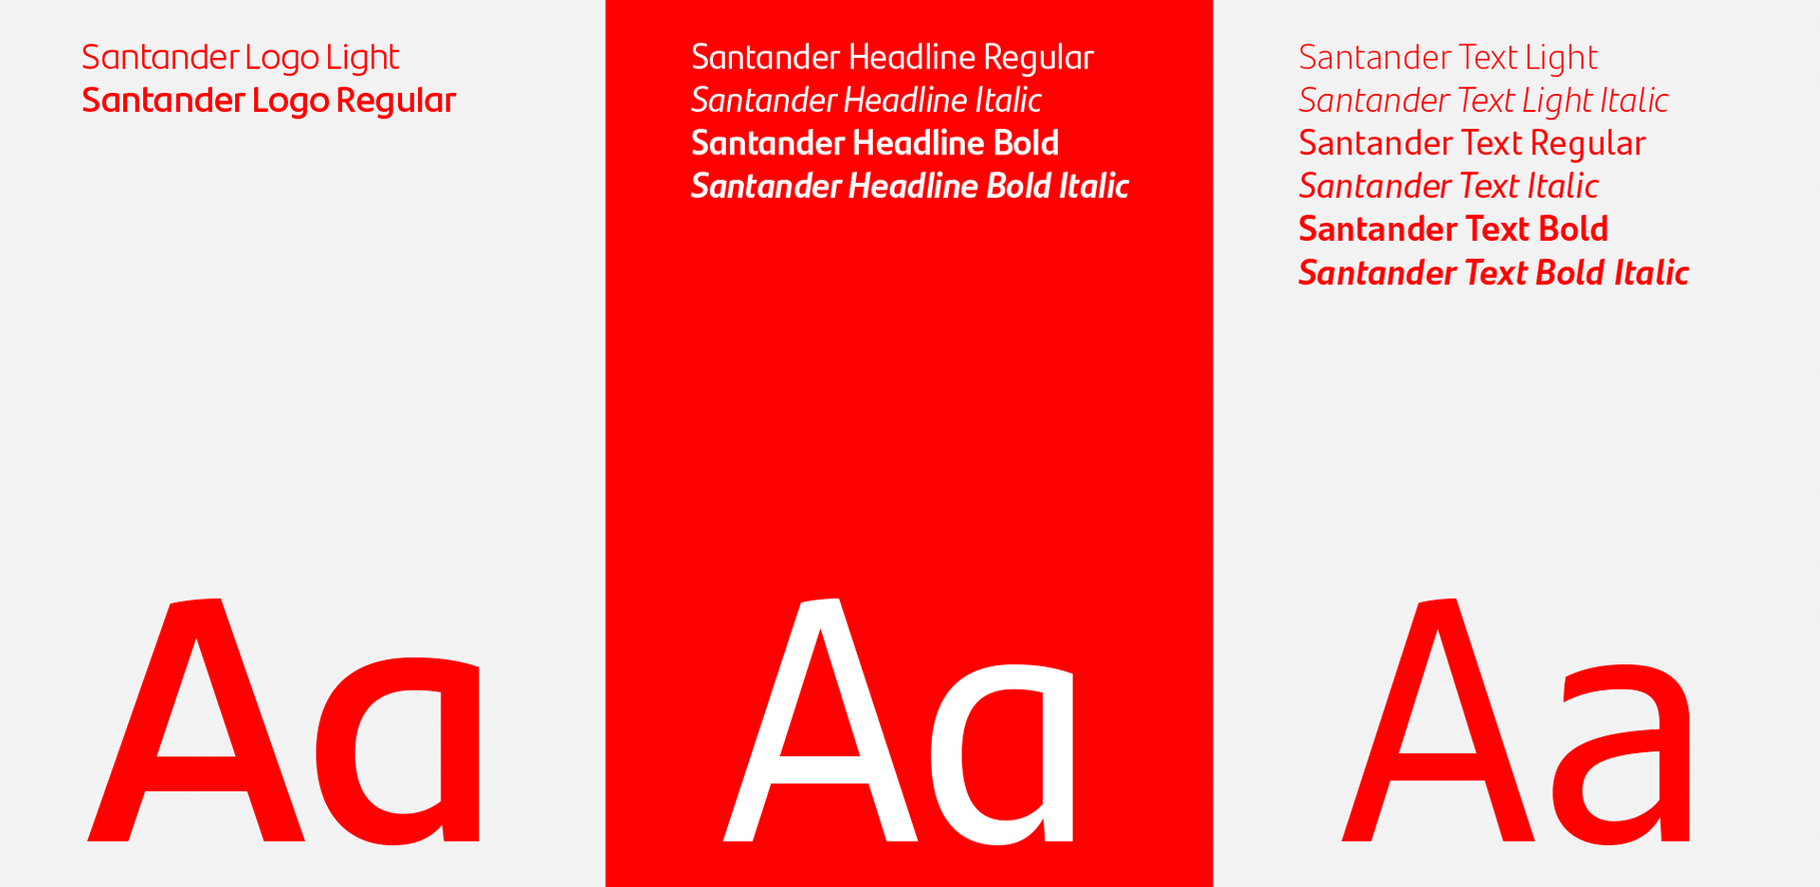 Santander, the first bank to redesign its app so it is more